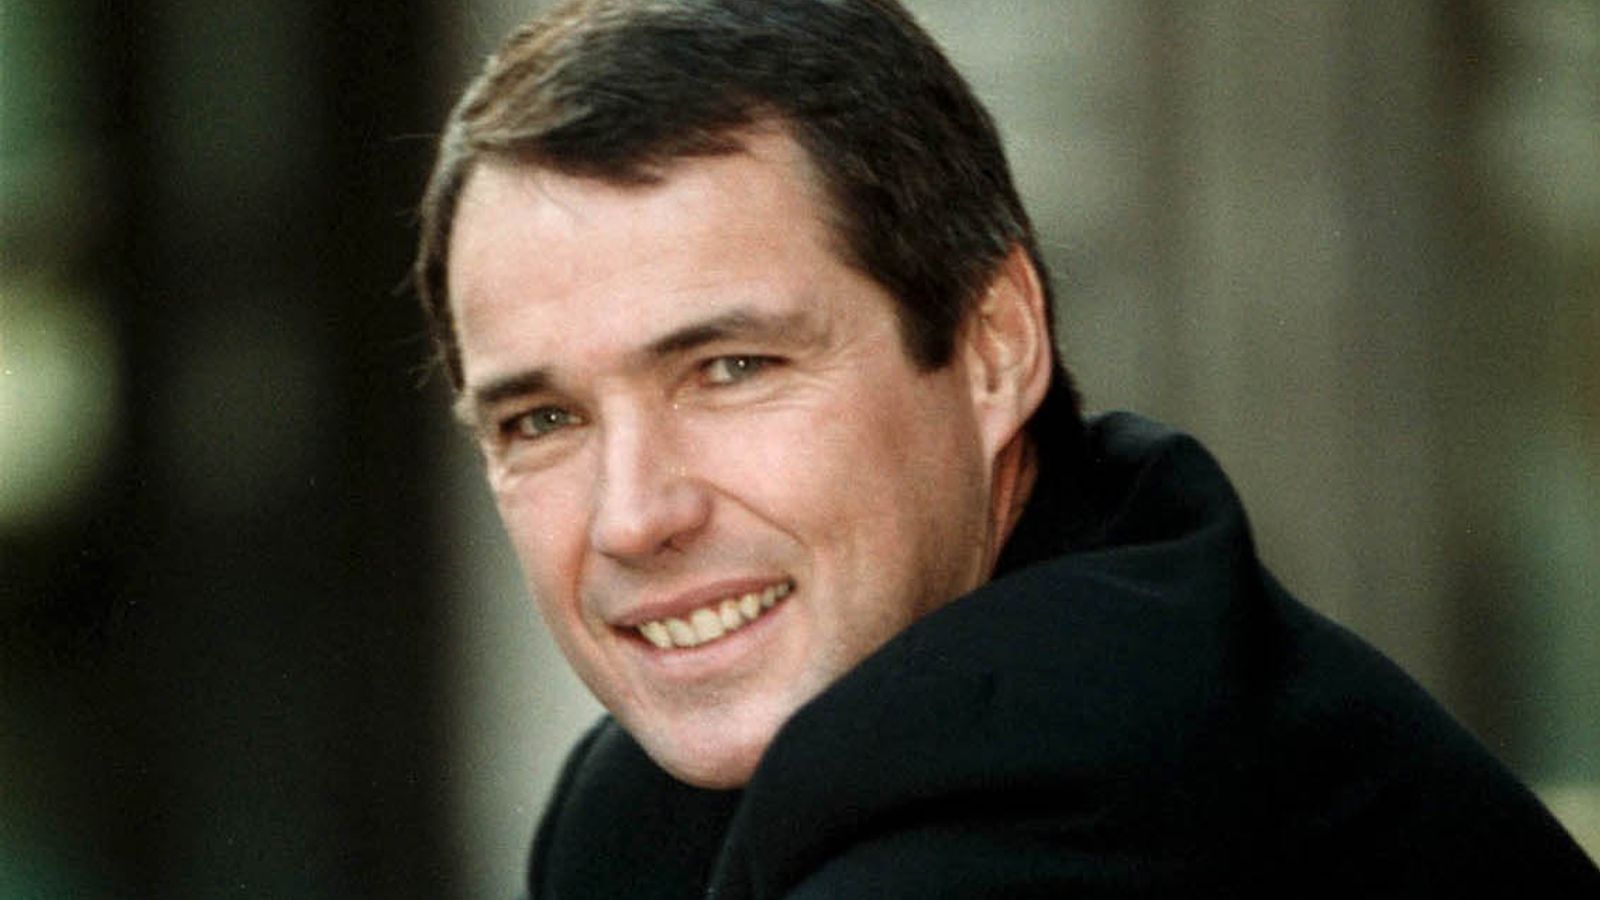 Former Liverpool captain and TV pundit Alan Hansen ‘seriously ill’ in hospital